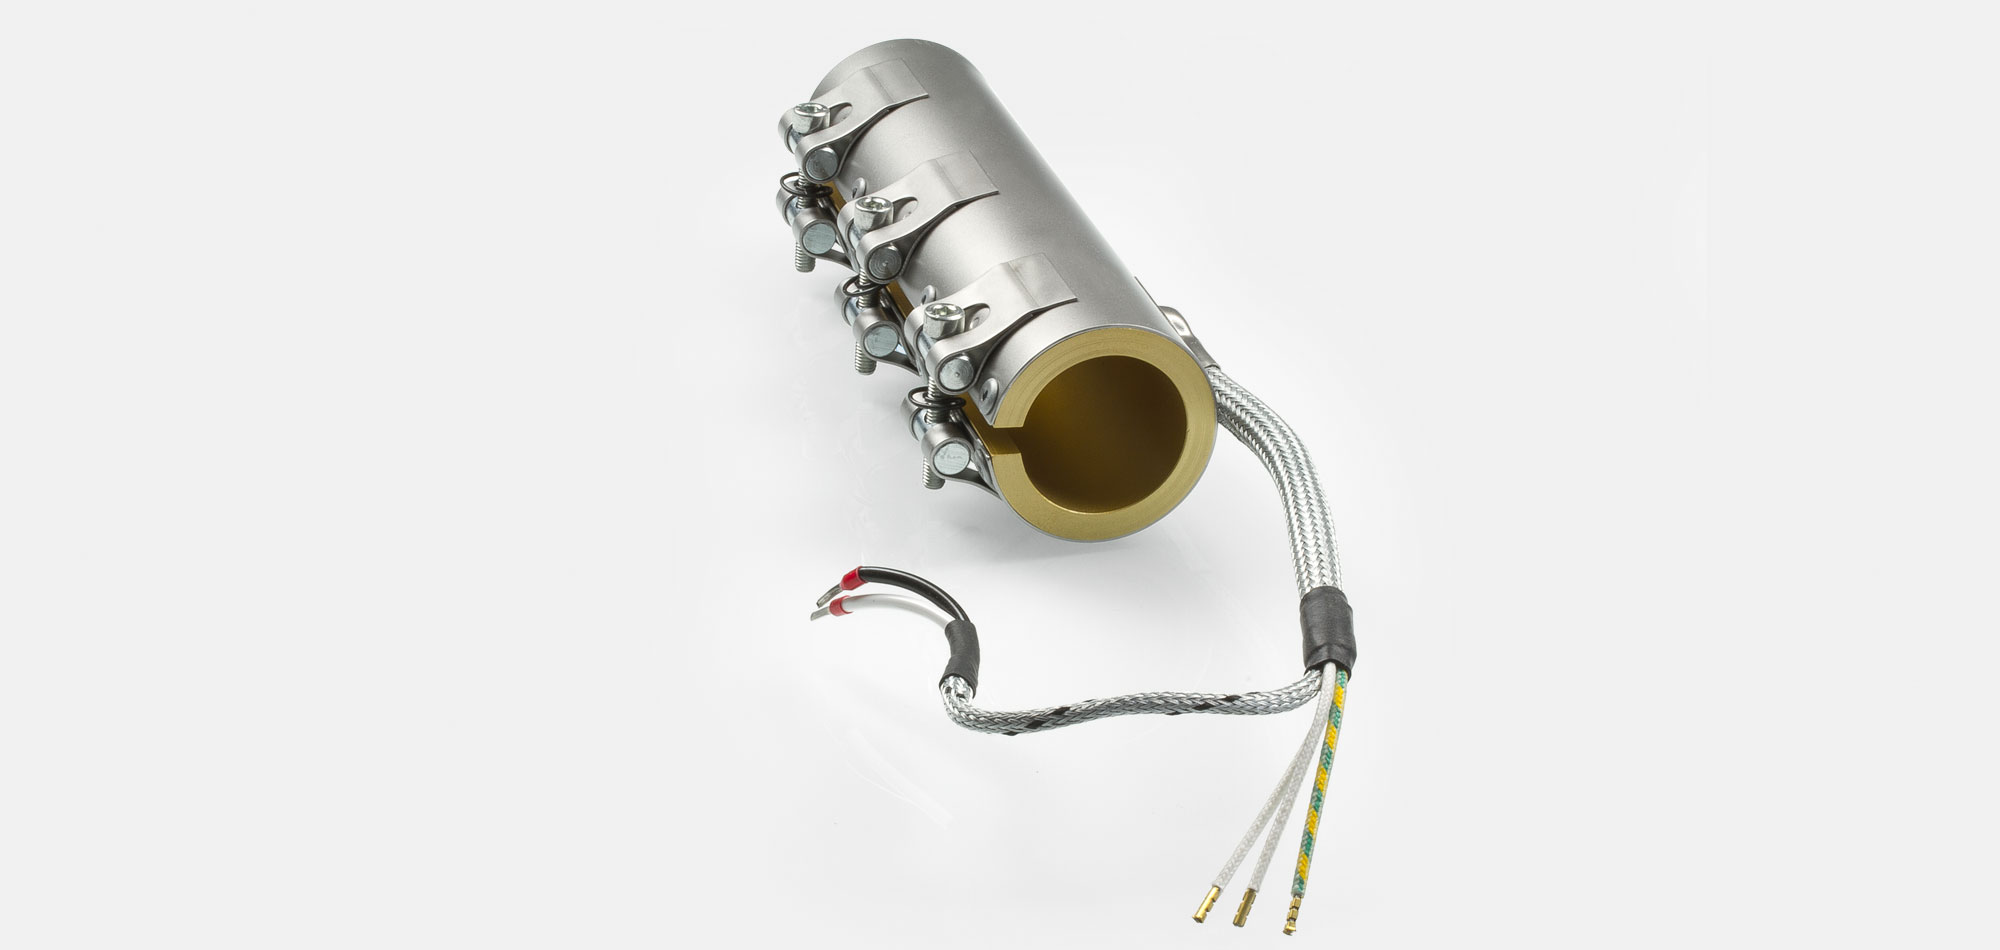 Nozzle Band Heater, for operating temperatures up to 450°C/550°C, injection molding, energy-efficient design, homogeneous heat flow, holes, cutouts, thermocouple connector, integrated thermocouple, special contour, tight installation space,cable extrusion